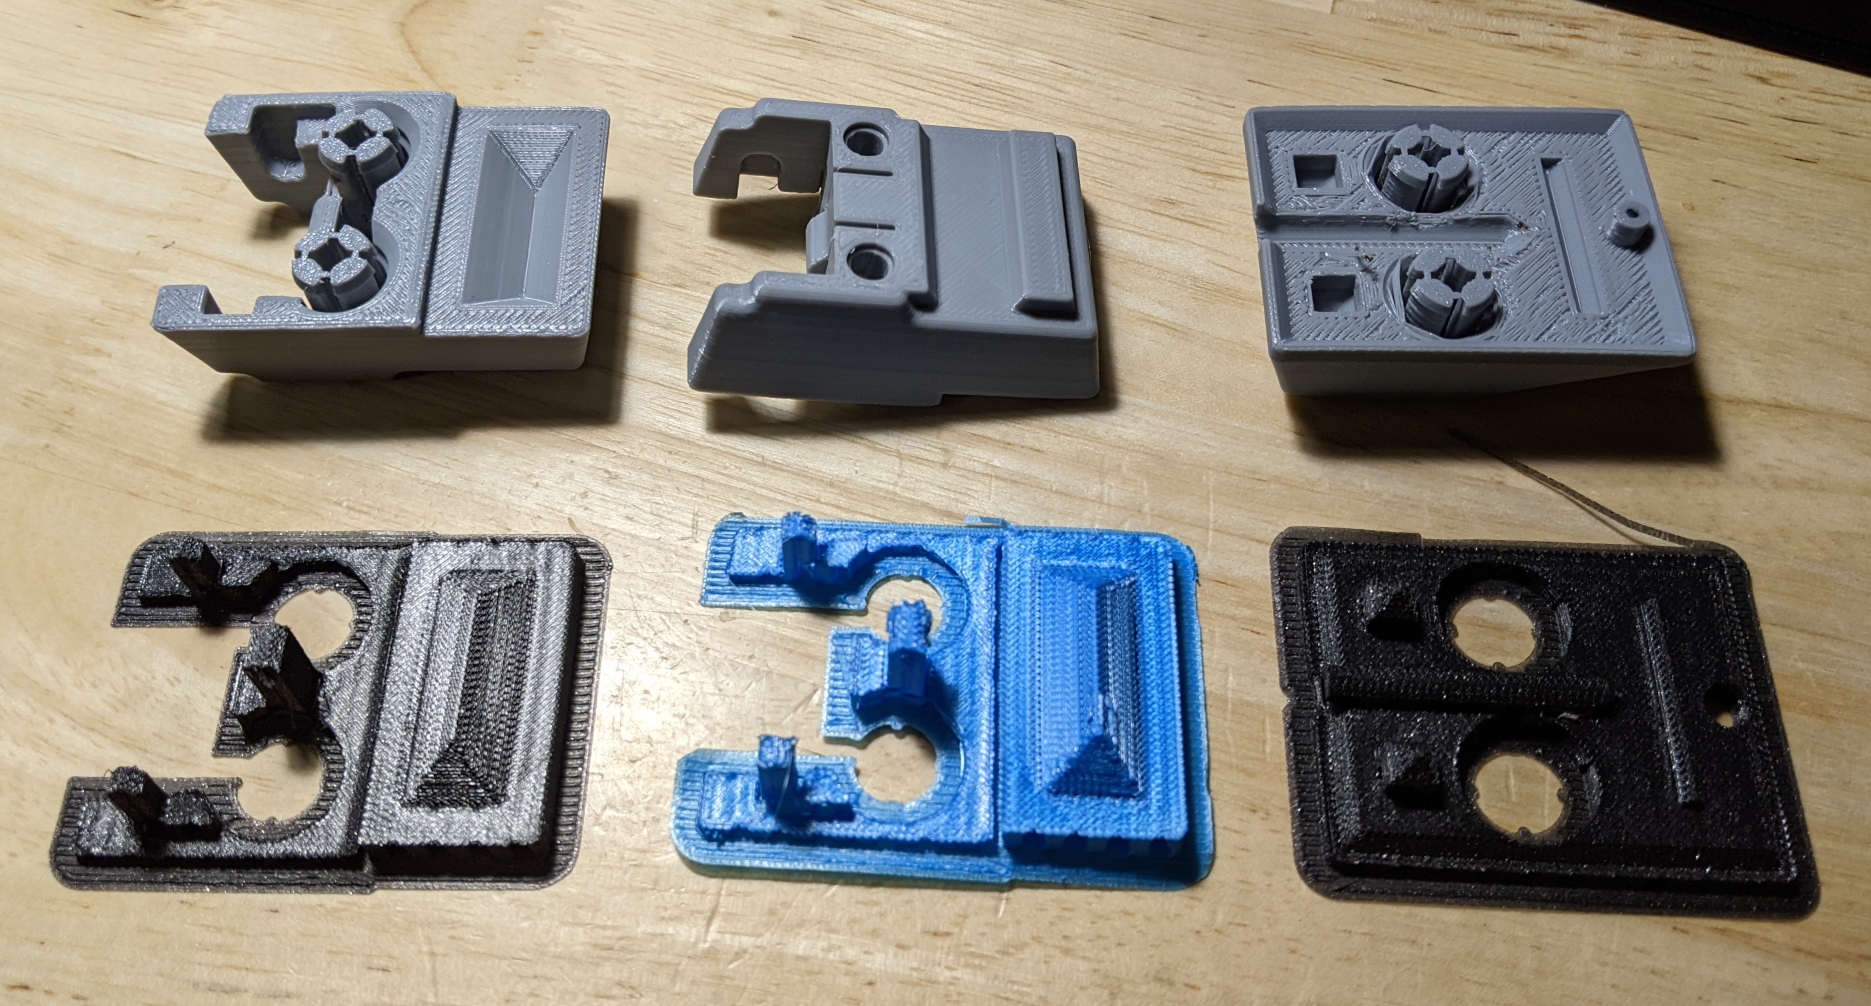 PETG parts and their PLA supports